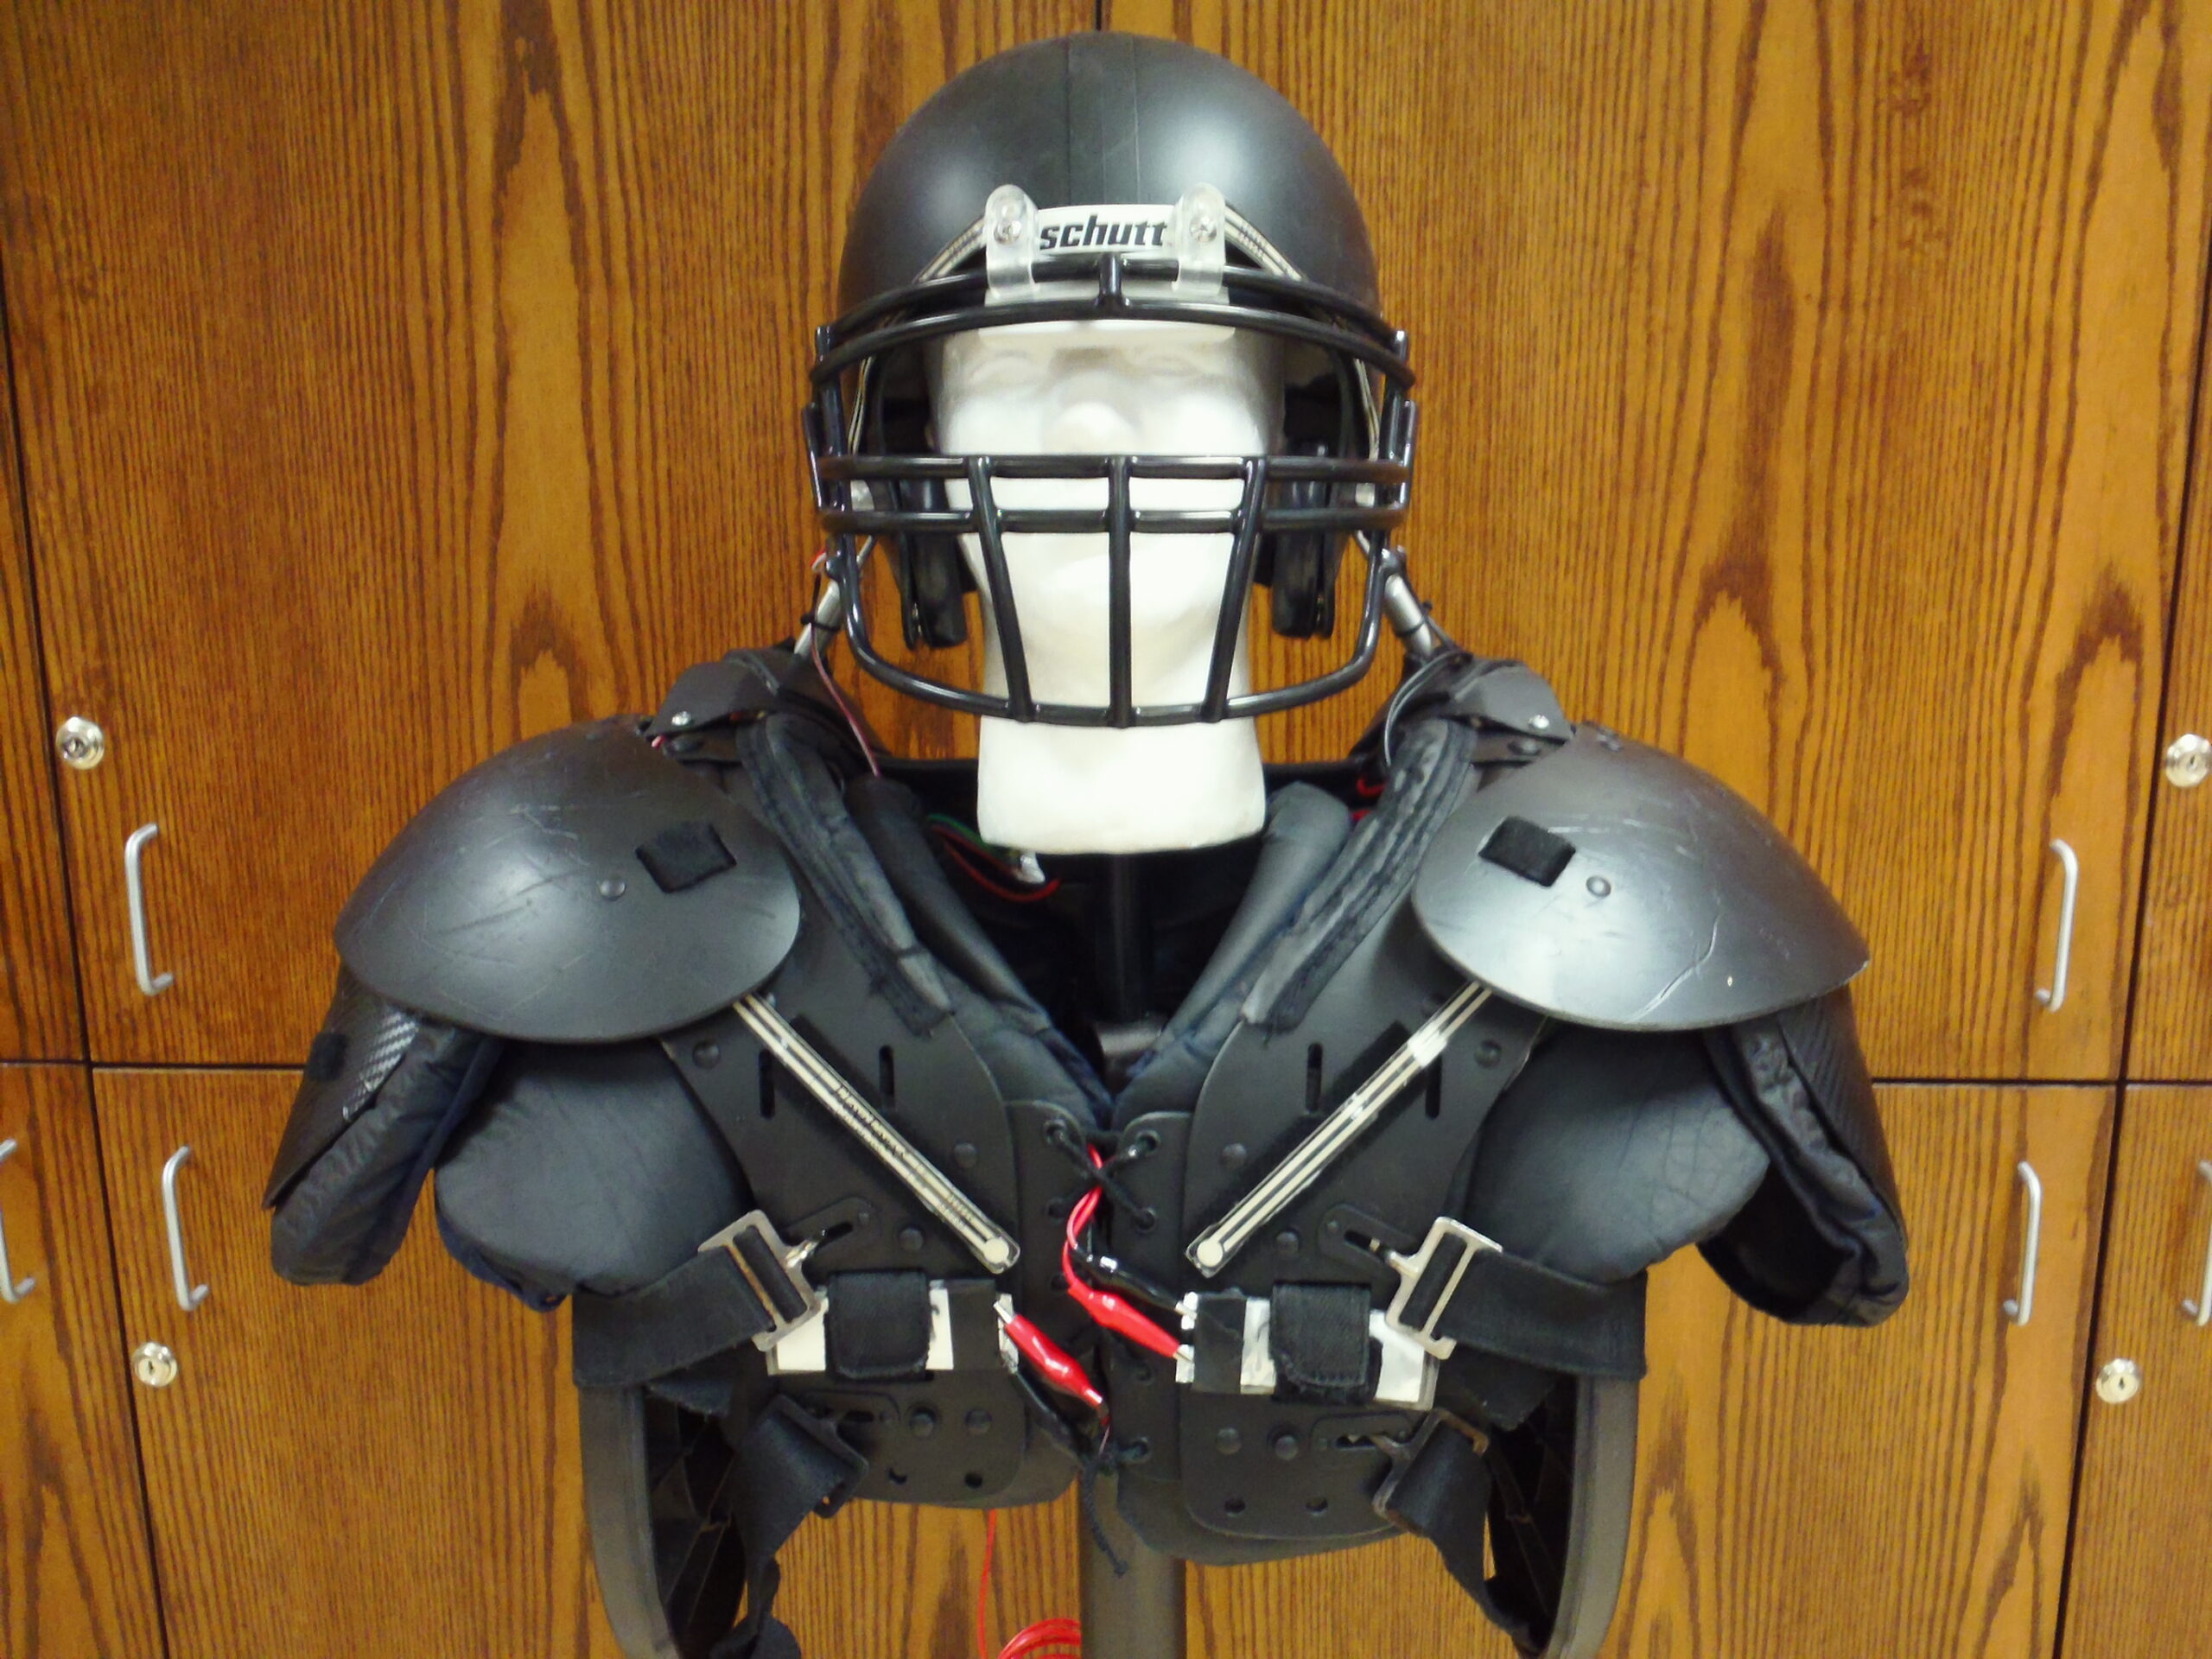 A Helmet Inspired By Woodpeckers Could Save Football Players From Concussions